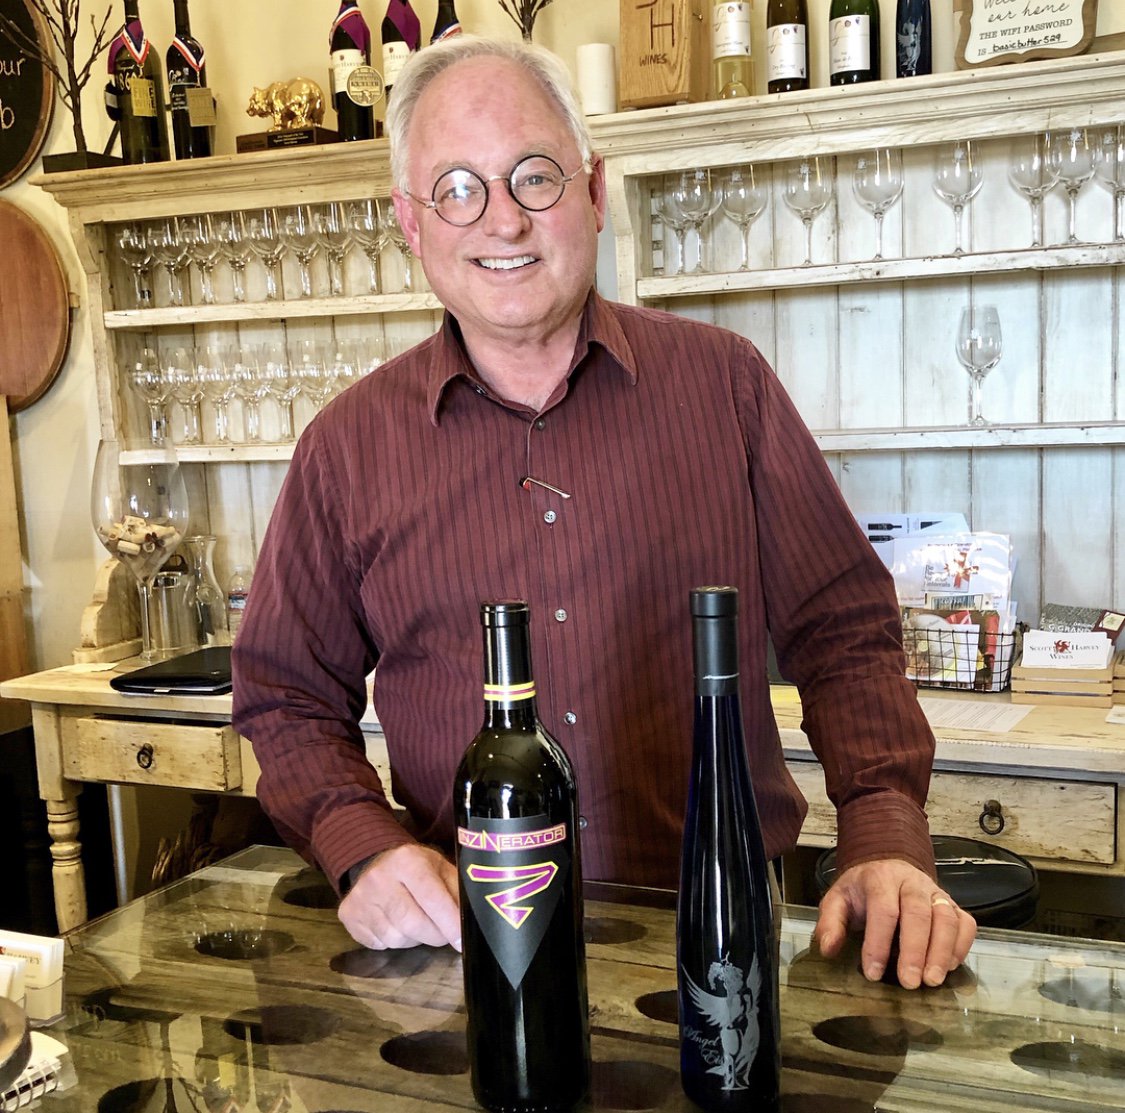 The man-of-the-hour is ready and waiting to pour you some summer #wines this weekend! Stop in for a tasting 11am-5pm at any of our three tasting locations. Cheers! ➡ bit.ly/2WuTQt5 #scottharveywines #amadorcountywine #sierrafoothillswine #winemaker #wineproducer